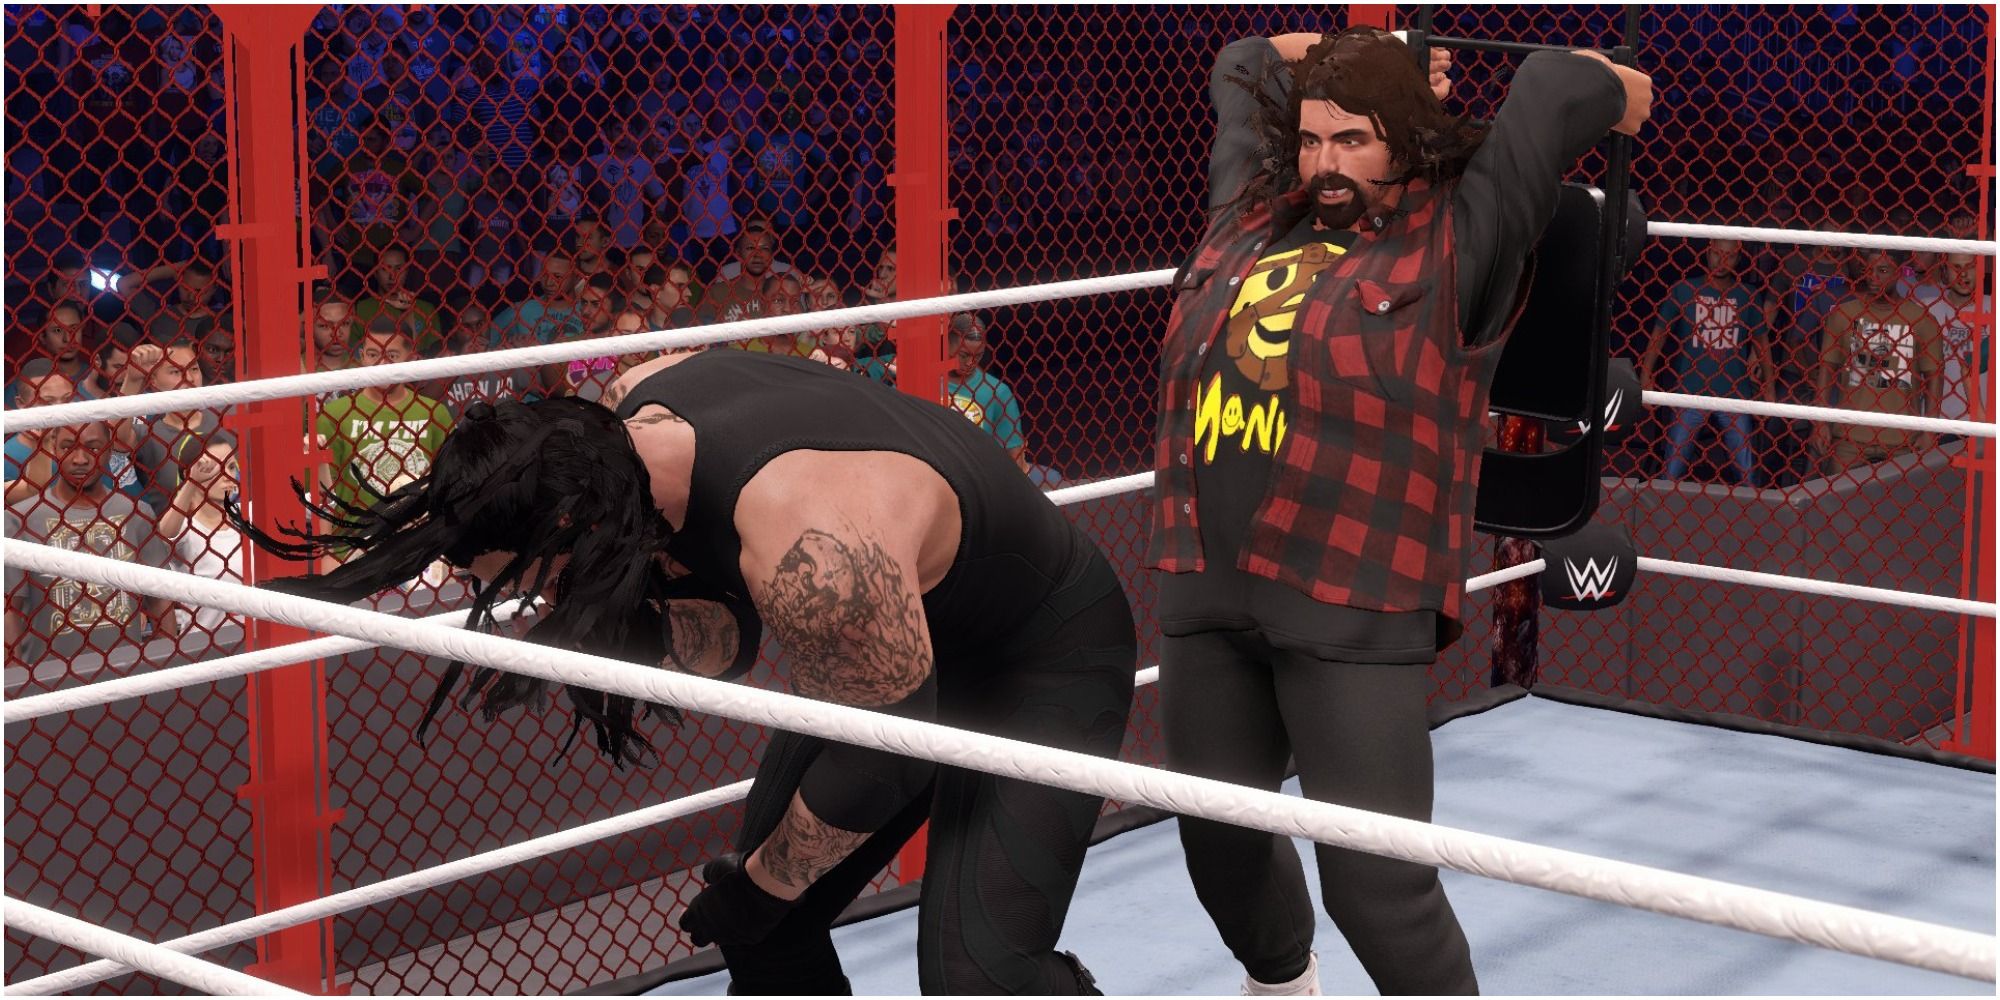 Mick Foley hitting Undertaker with a chair